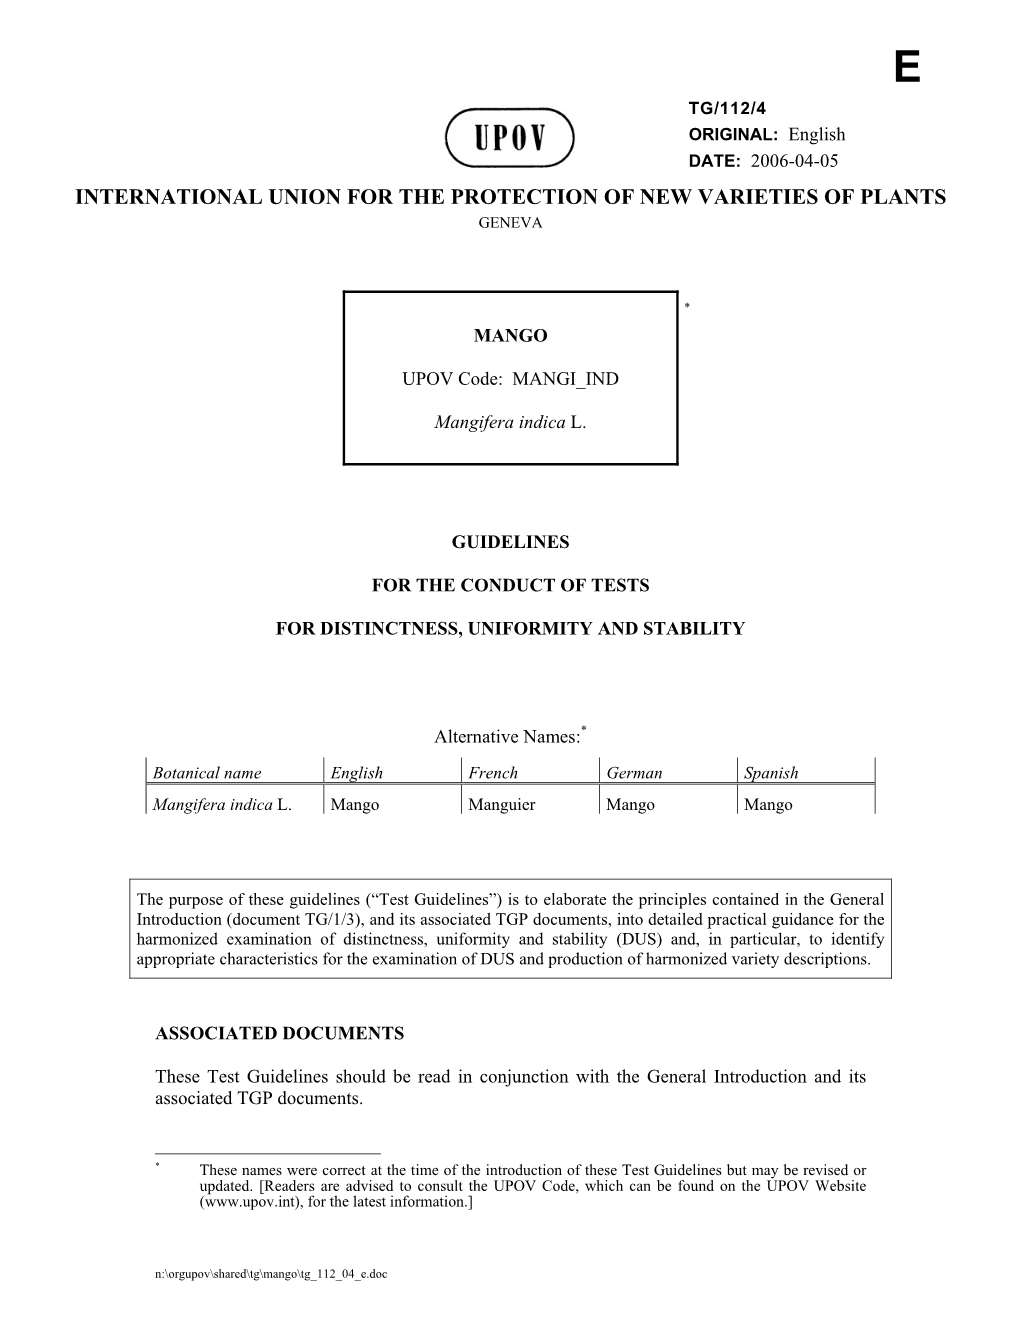 International Union for the Protection of New Varieties of Plants Geneva